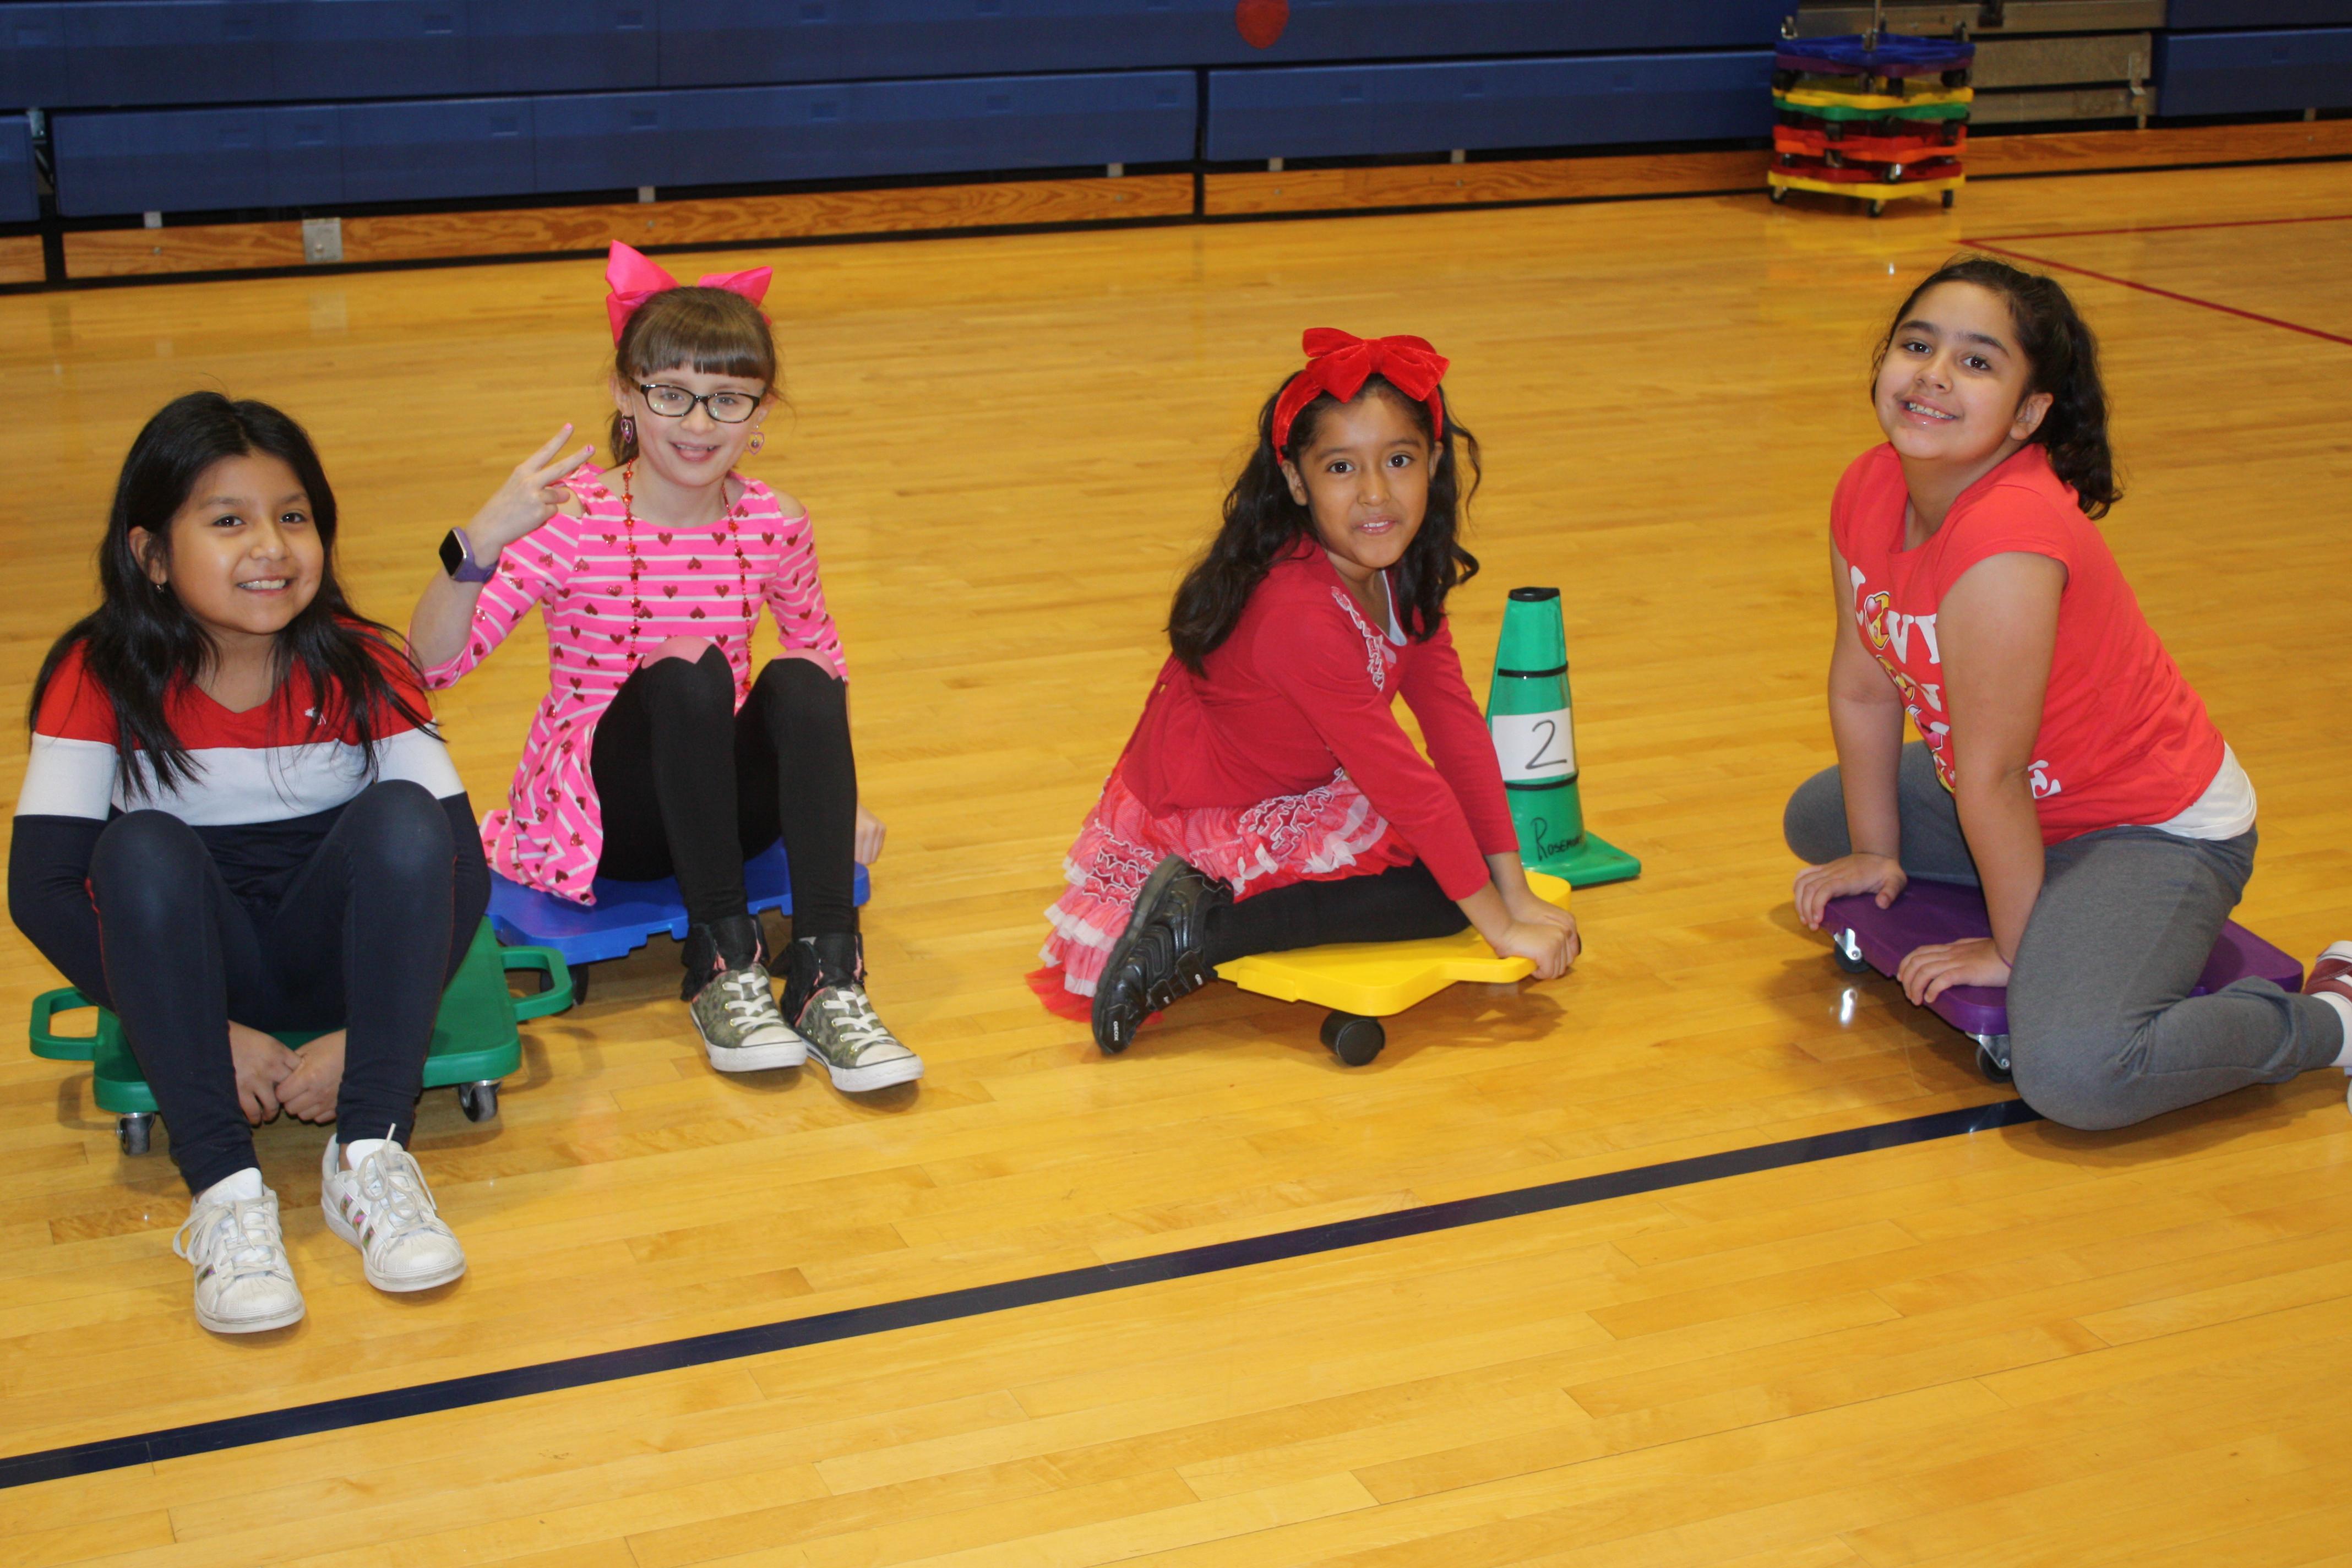 Students sitting together in the gym during PE class